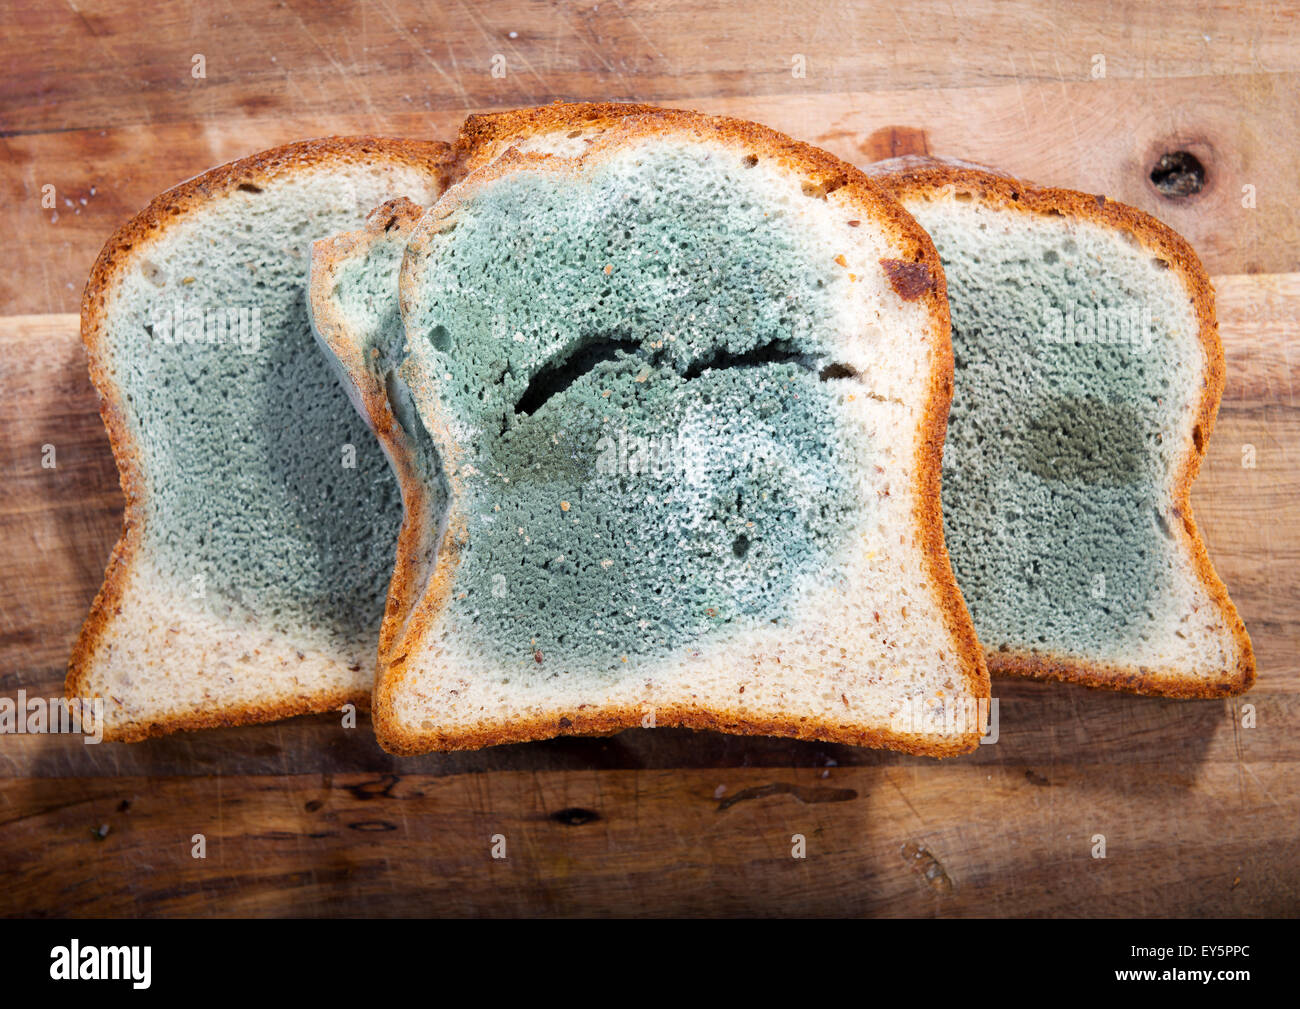 https://c8.alamy.com/comp/EY5PPC/mold-growing-rapidly-on-moldy-bread-in-green-and-white-spores-EY5PPC.jpg